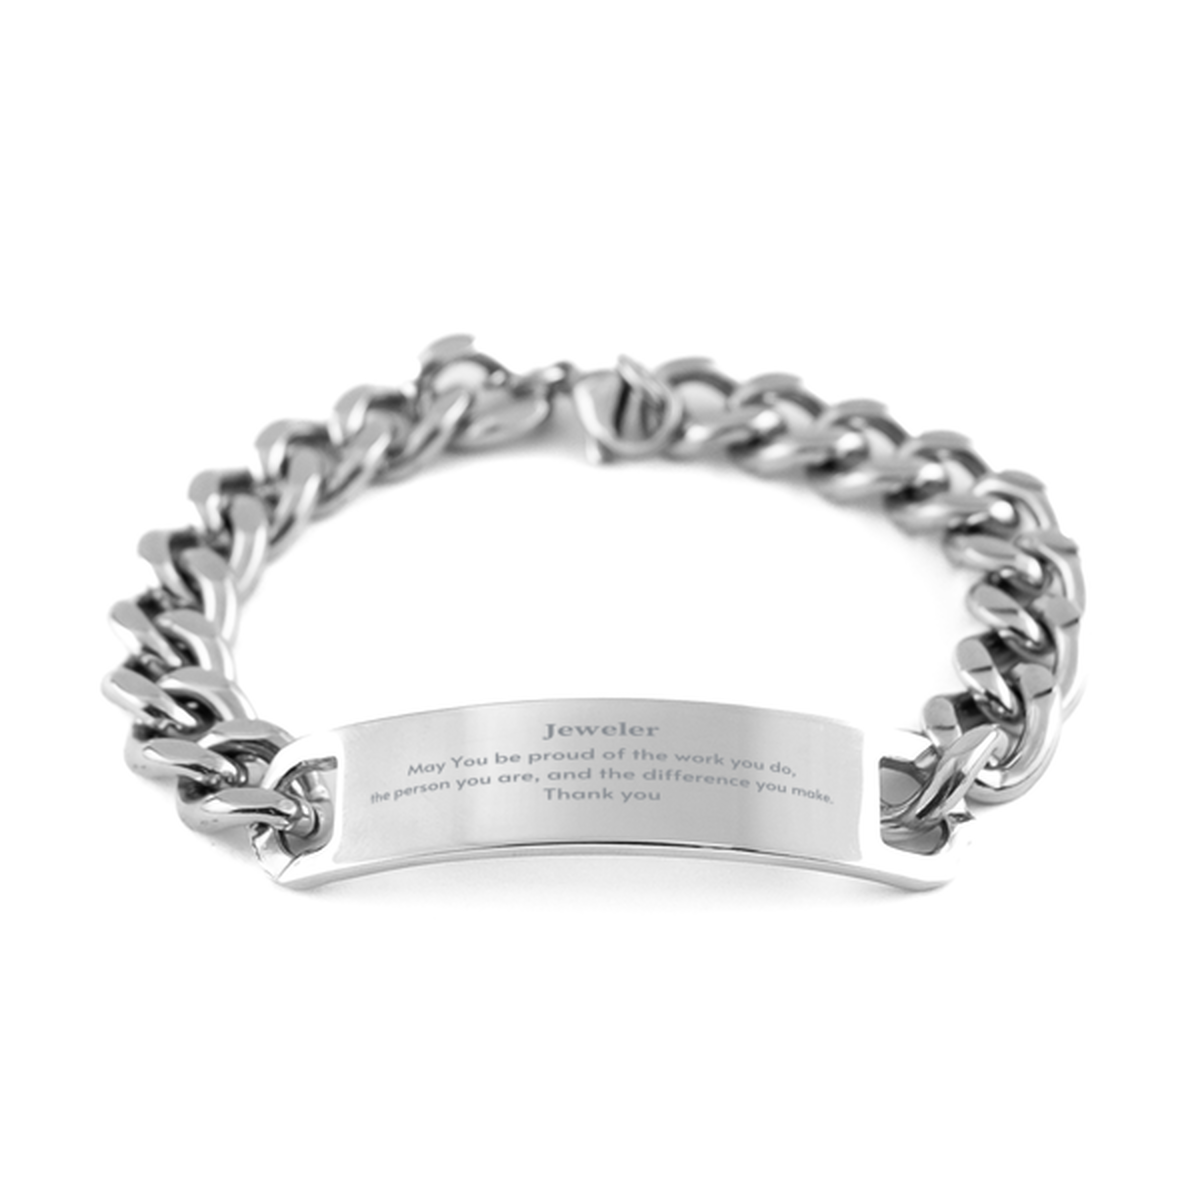 Heartwarming Cuban Chain Stainless Steel Bracelet Retirement Coworkers Gifts for Jeweler, Jeweler May You be proud of the work you do, the person you are Gifts for Boss Men Women Friends